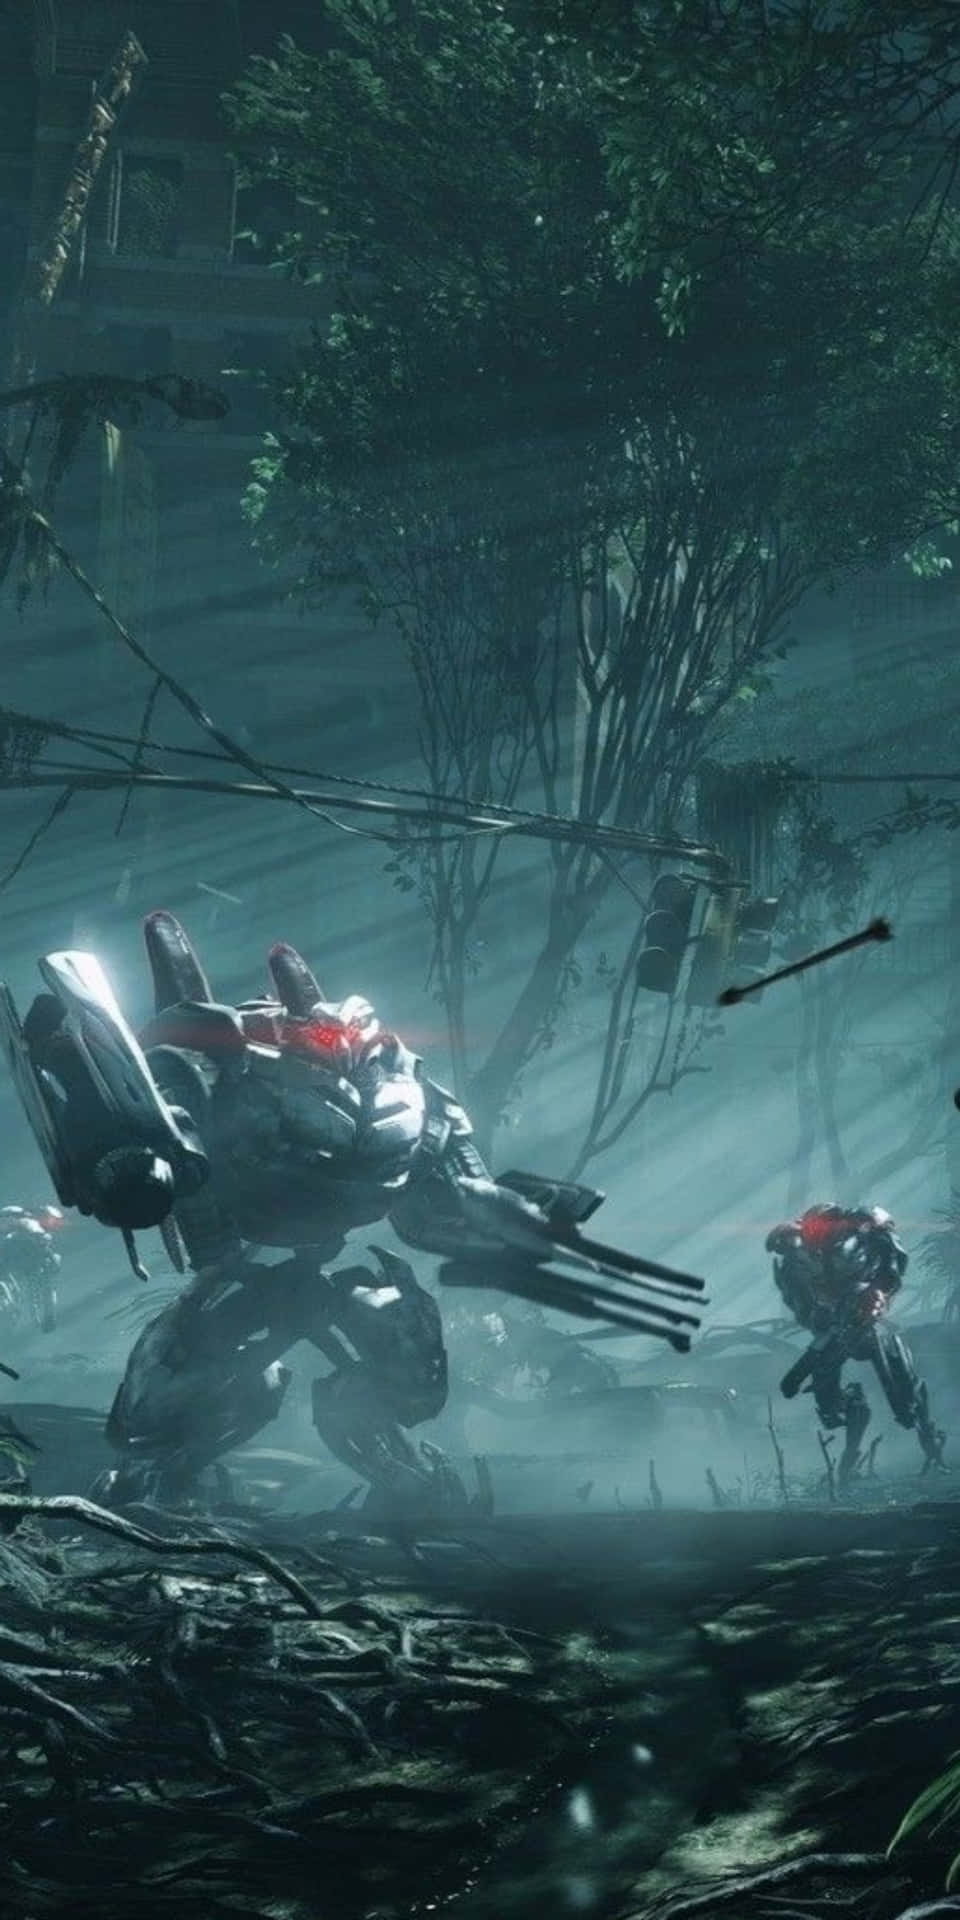 "Experience The Ultimate Action Adventure with Pixel 3 and Crysis 3"